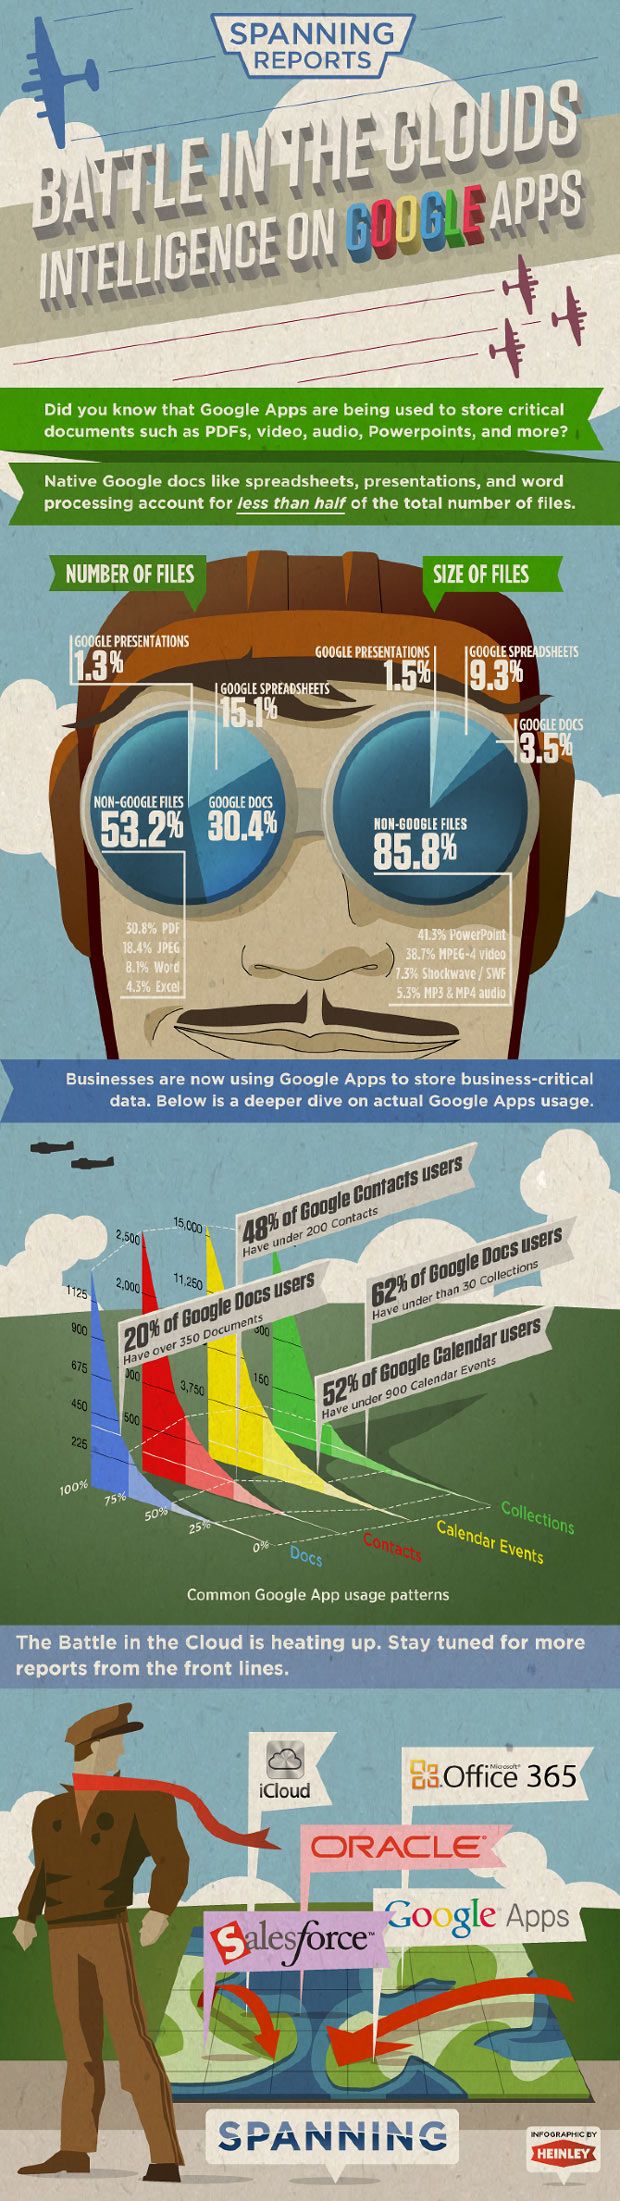 Advertising-Infographics-Battle-in-the-Clouds Advertising Infographics : Battle in the Clouds